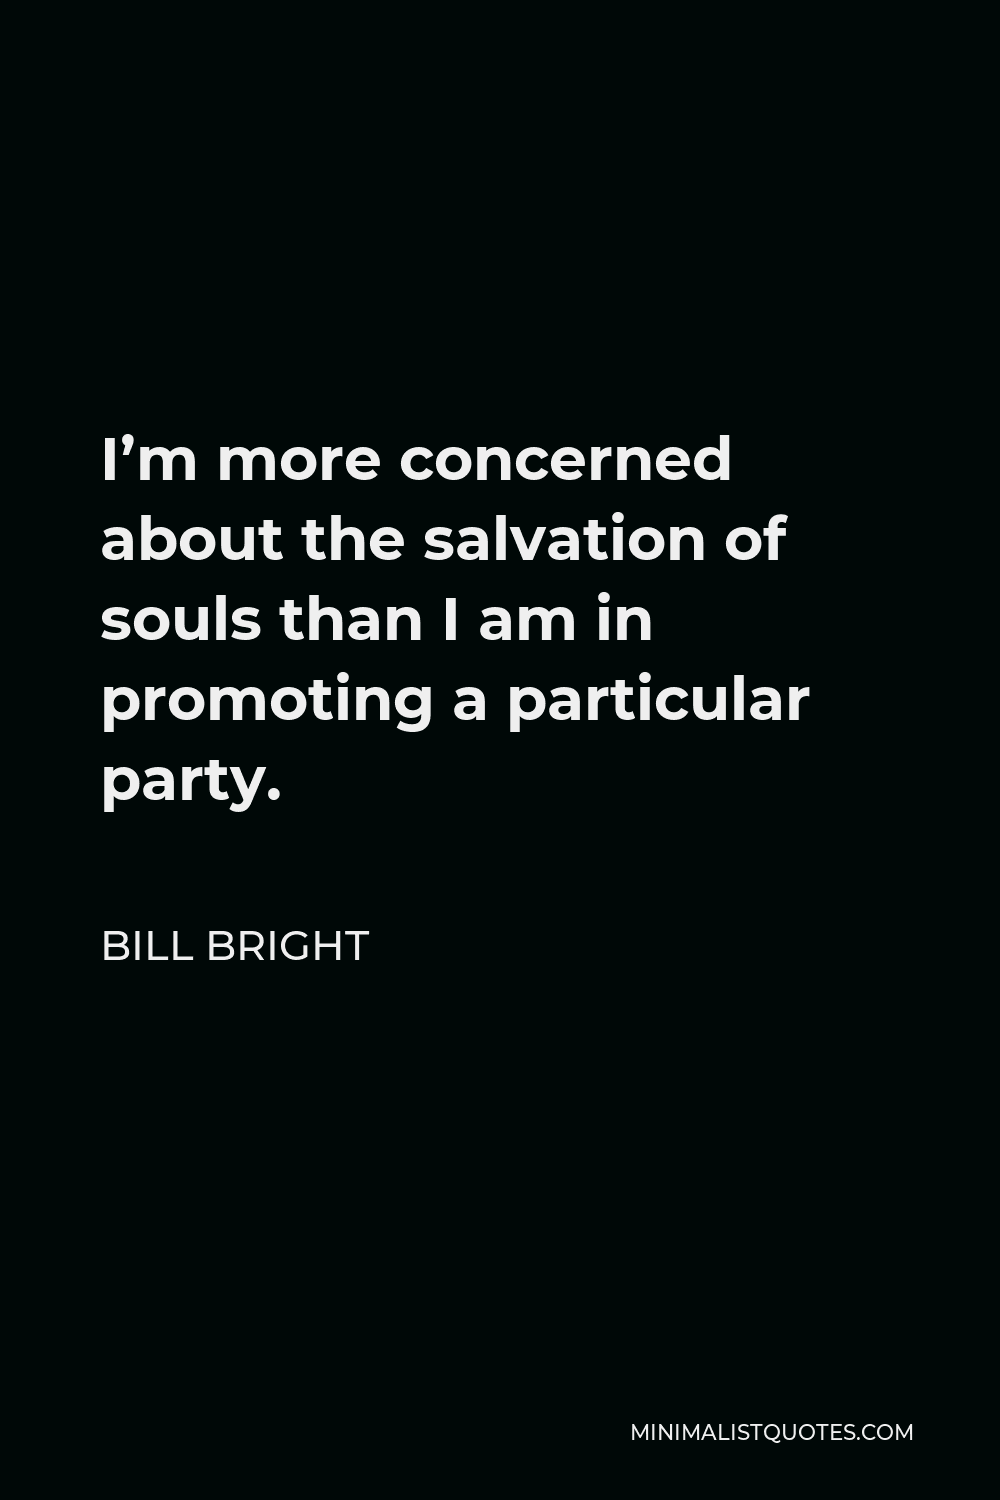 Bill Bright Quote - I’m more concerned about the salvation of souls than I am in promoting a particular party.